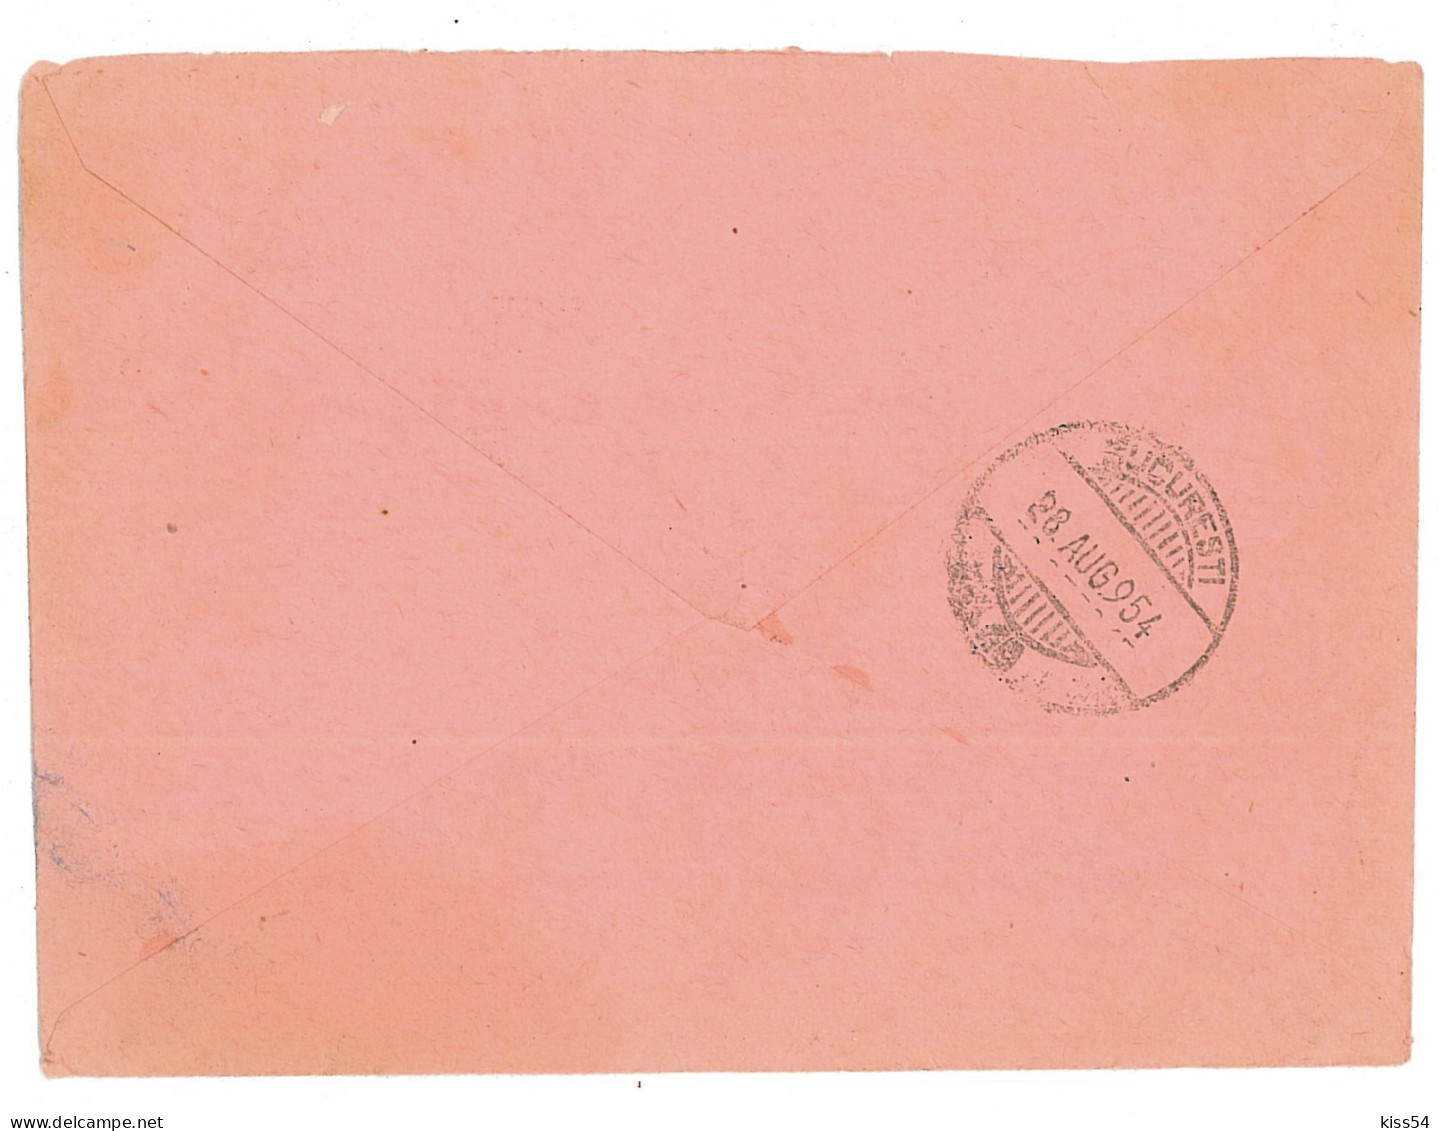 CIP 12 - 191-a Bucuresti, REGISTERED Cover - 1954 - Covers & Documents